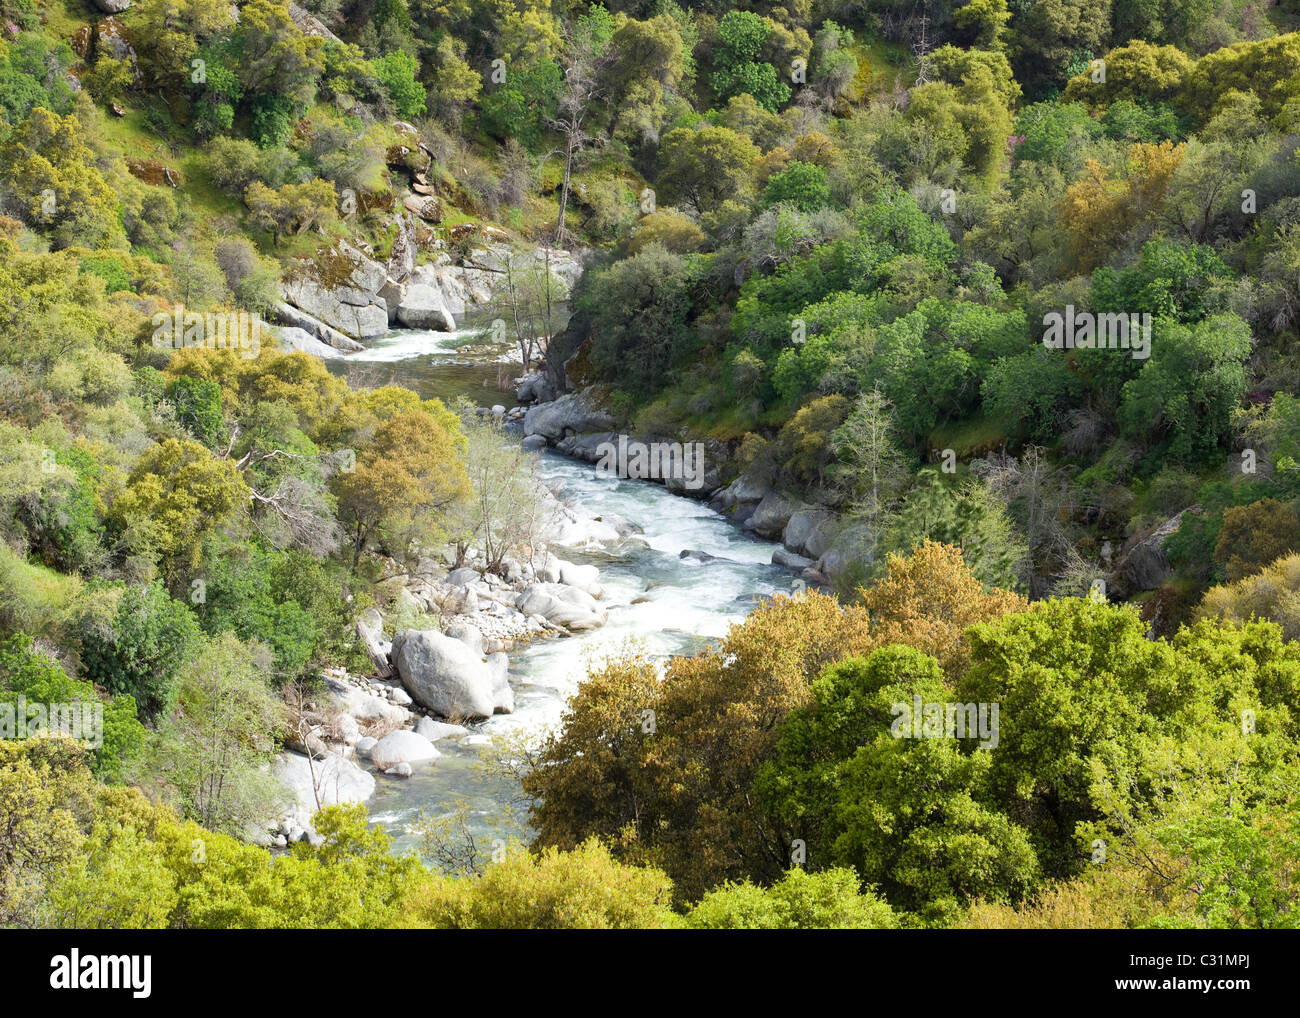 Small rocky river stream in a wooded valley Stock Photo